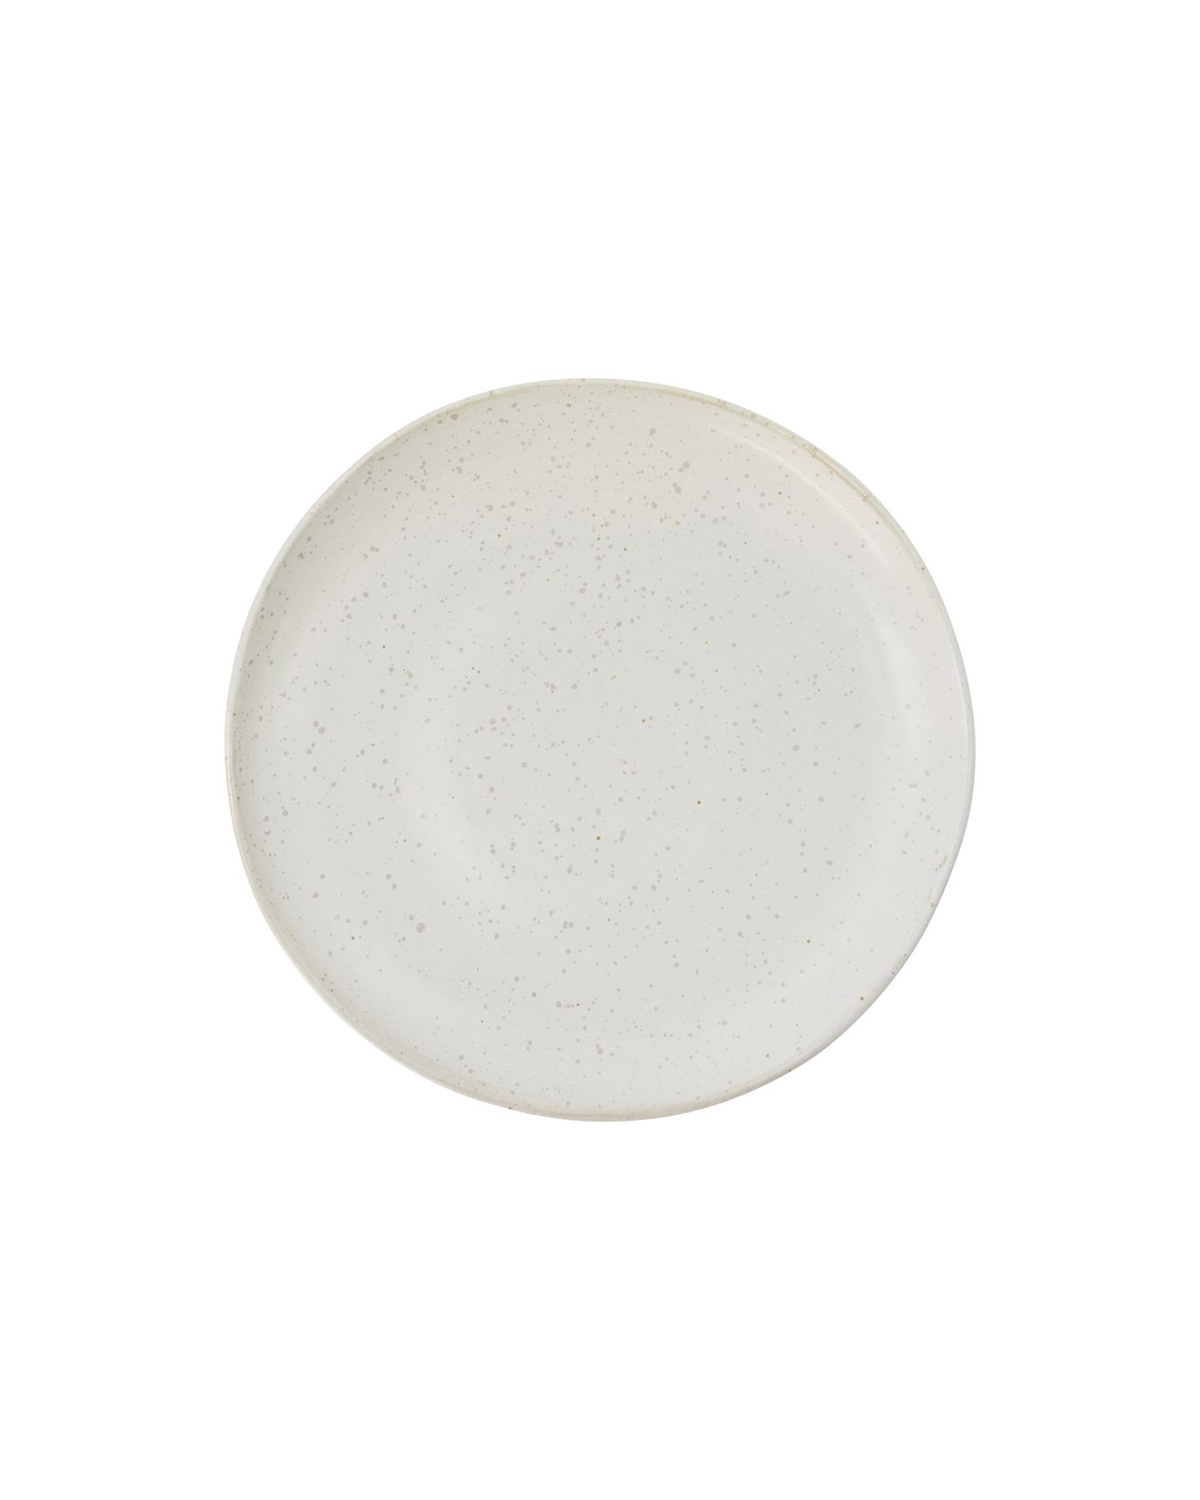 Lunch plate Pion - grey/white